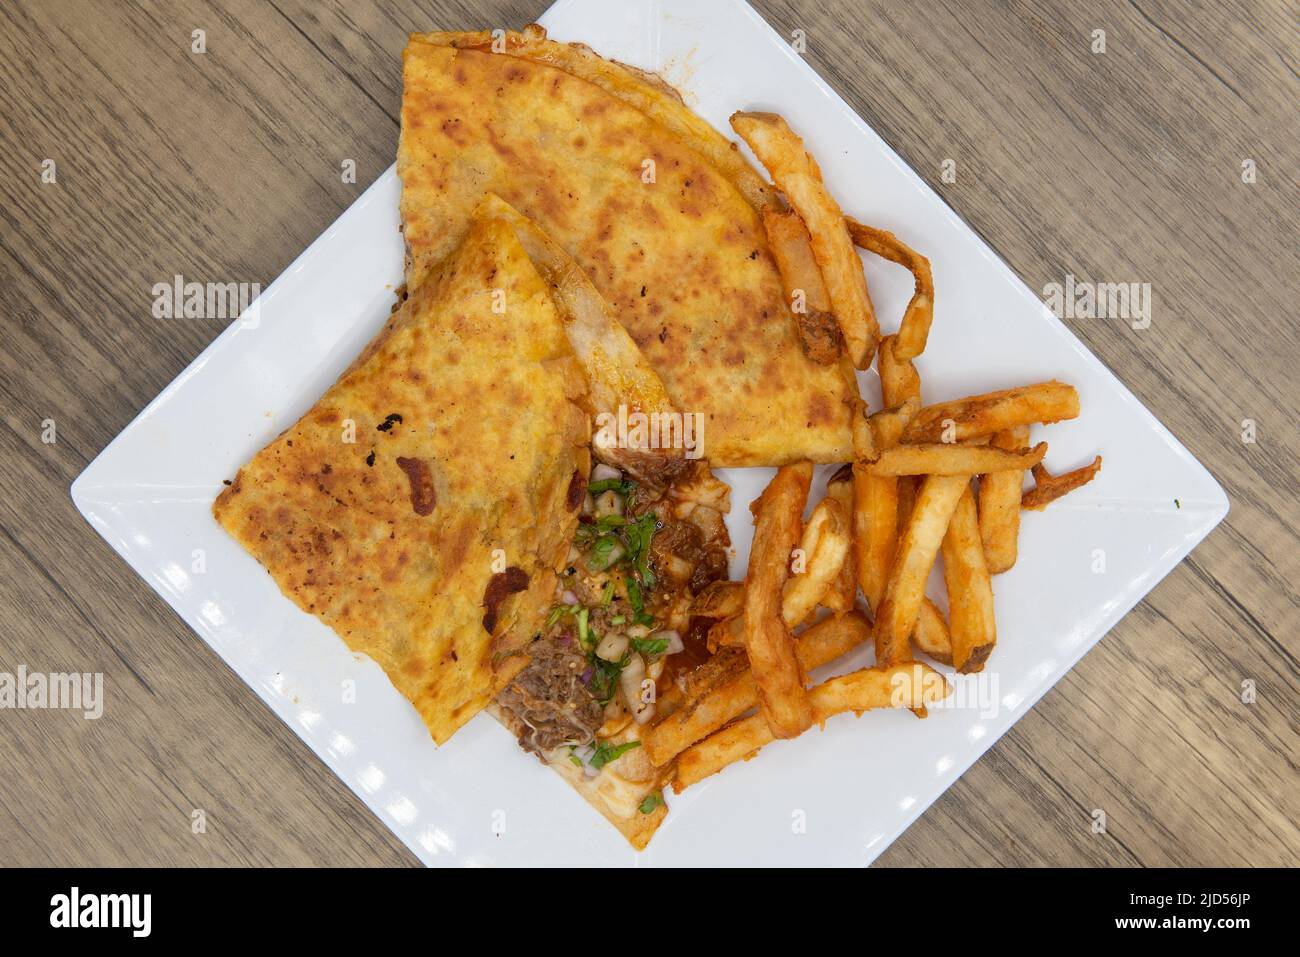 Overhead view of appetizing quesadilla birria tortilla for a tempting Mexican food delicacy. Stock Photo